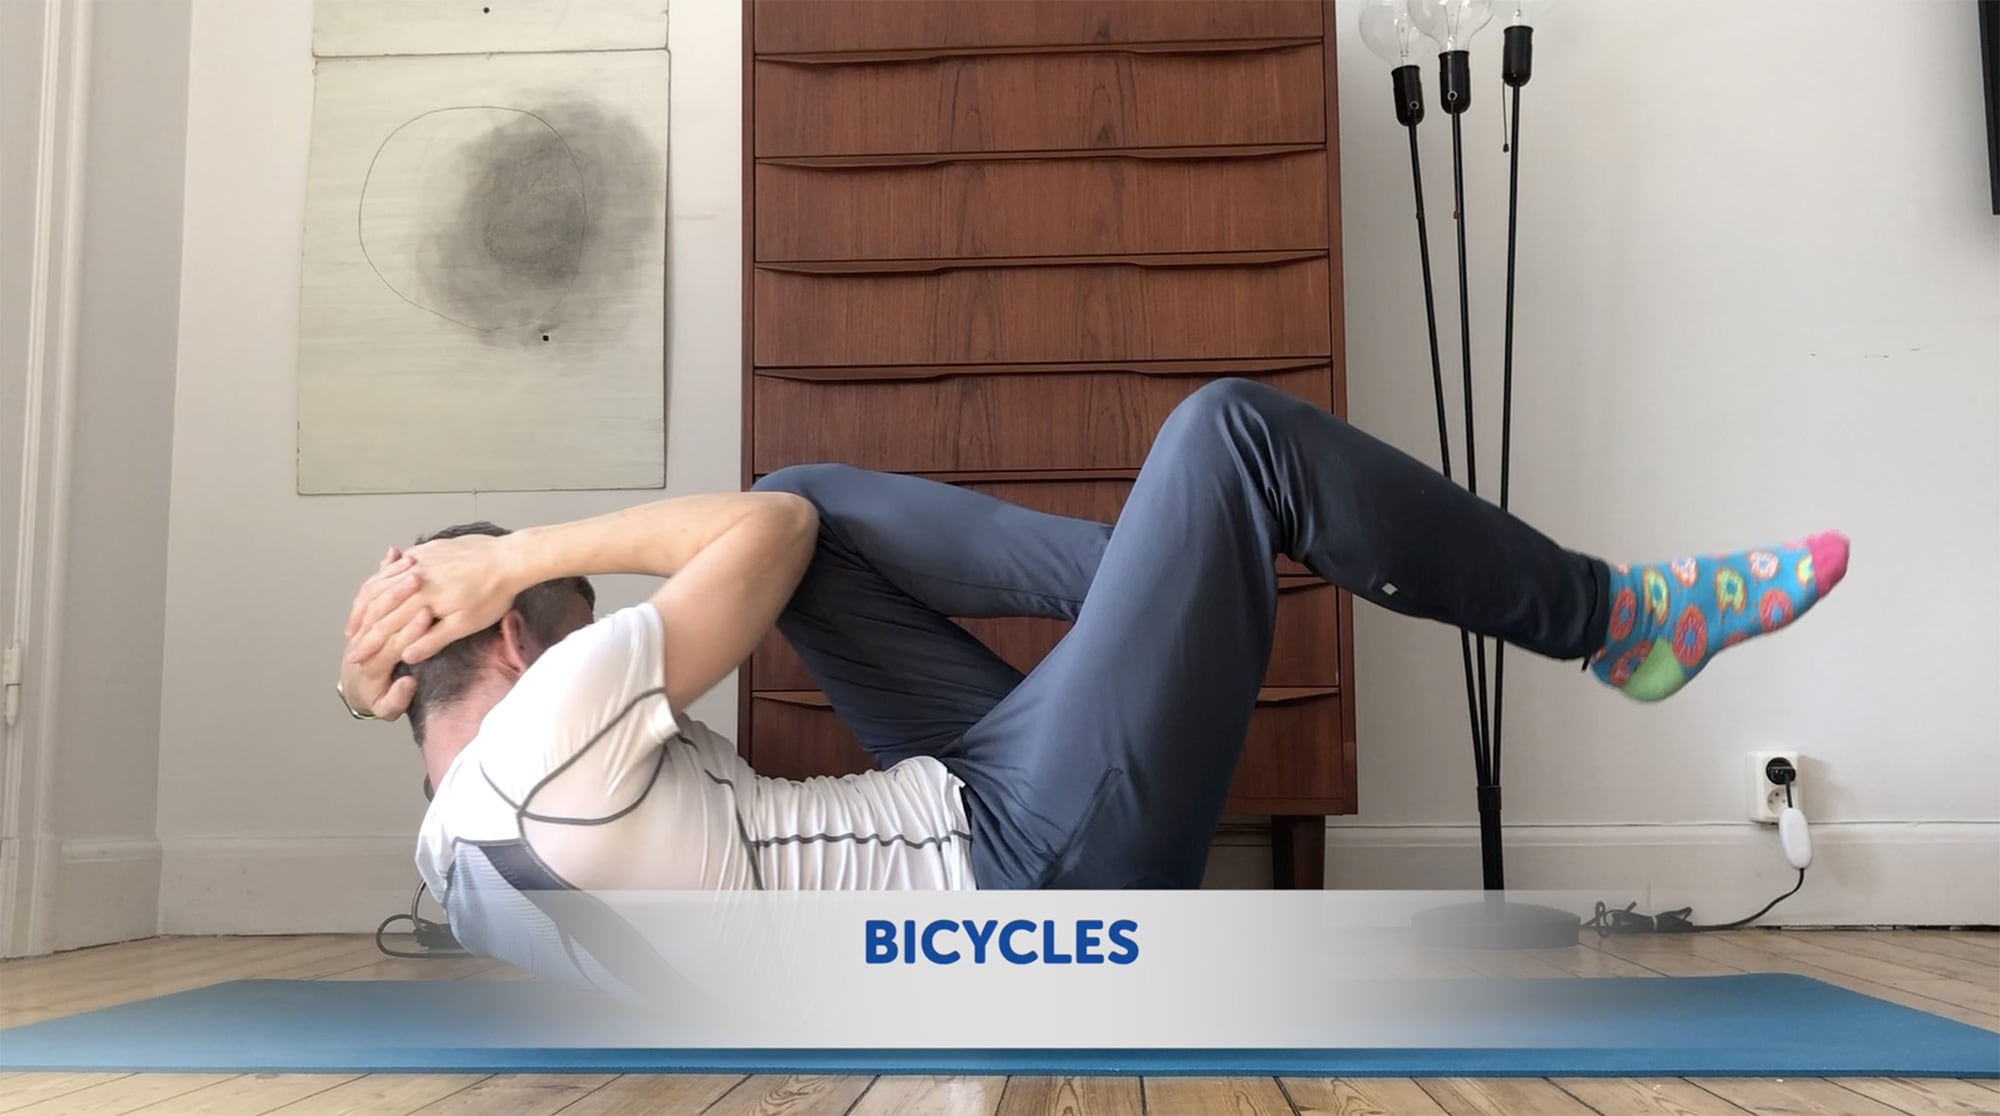 Bicycles make your obliques work too